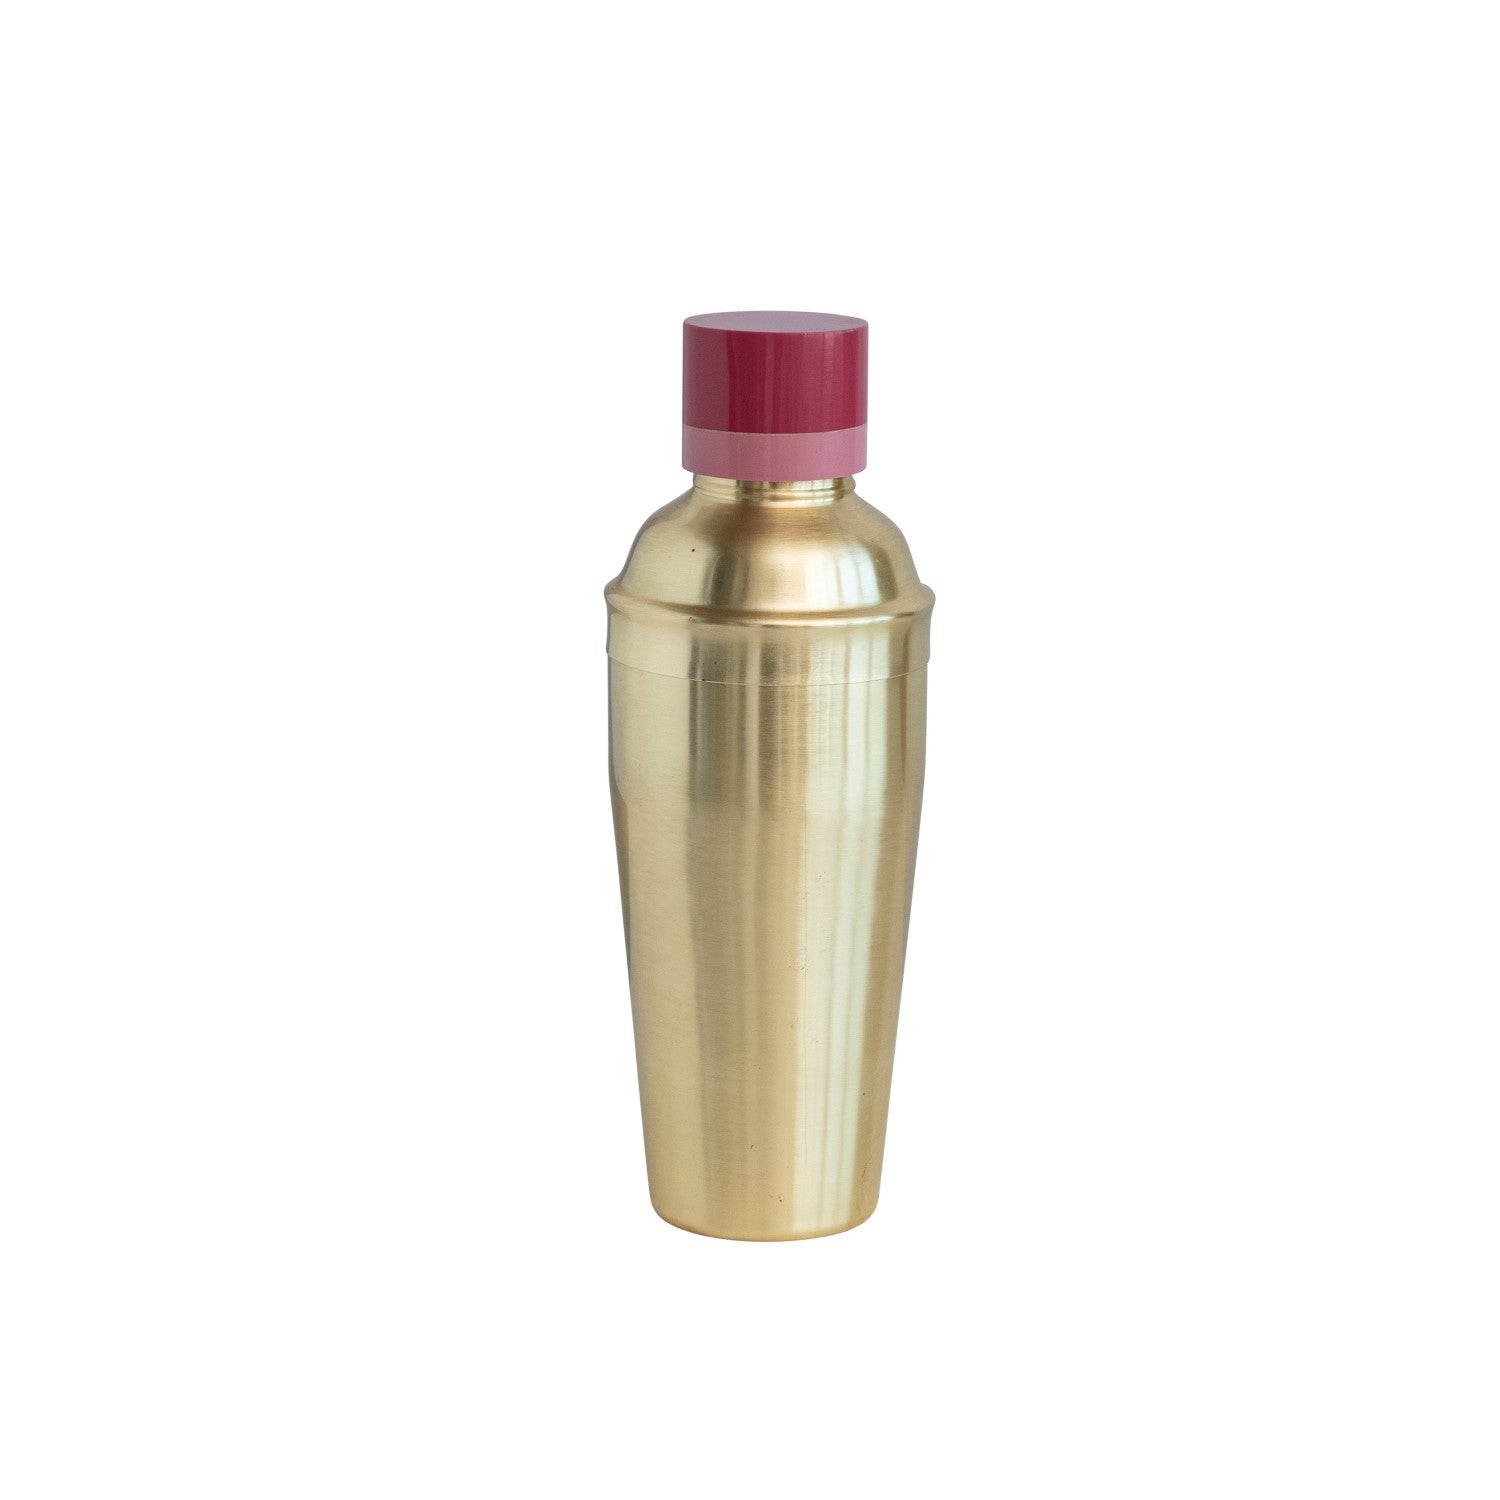 Fun, Moderate Stainless Steel Cocktail Shaker w/ Resin Top, Brass Finish and Pink